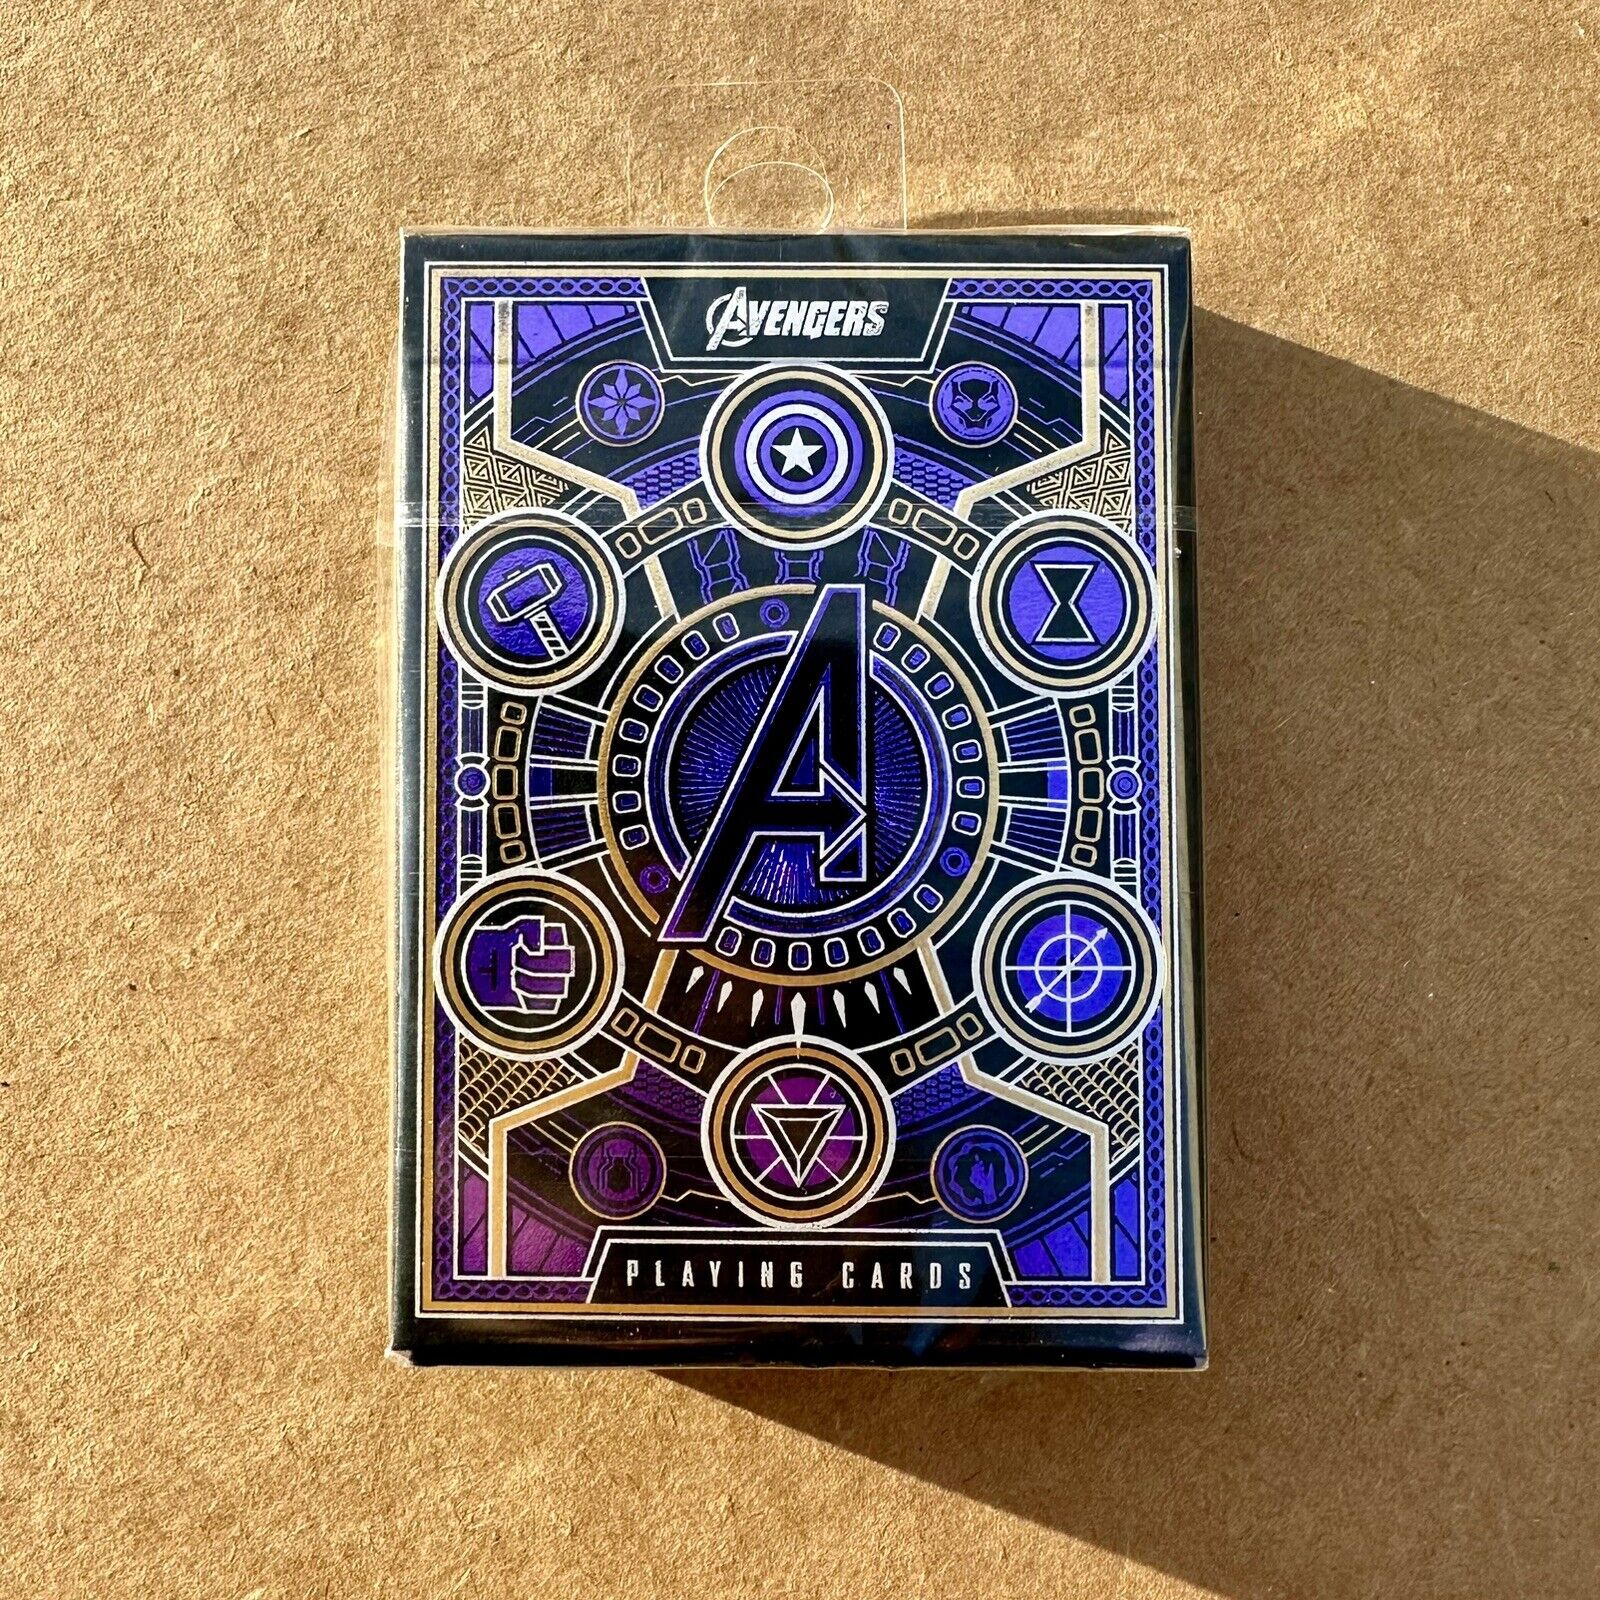 Theory11 🔥 AVENGERS 🔥 Playing Cards MARVEL Theory Eleven 11 SEALED MINT PACK